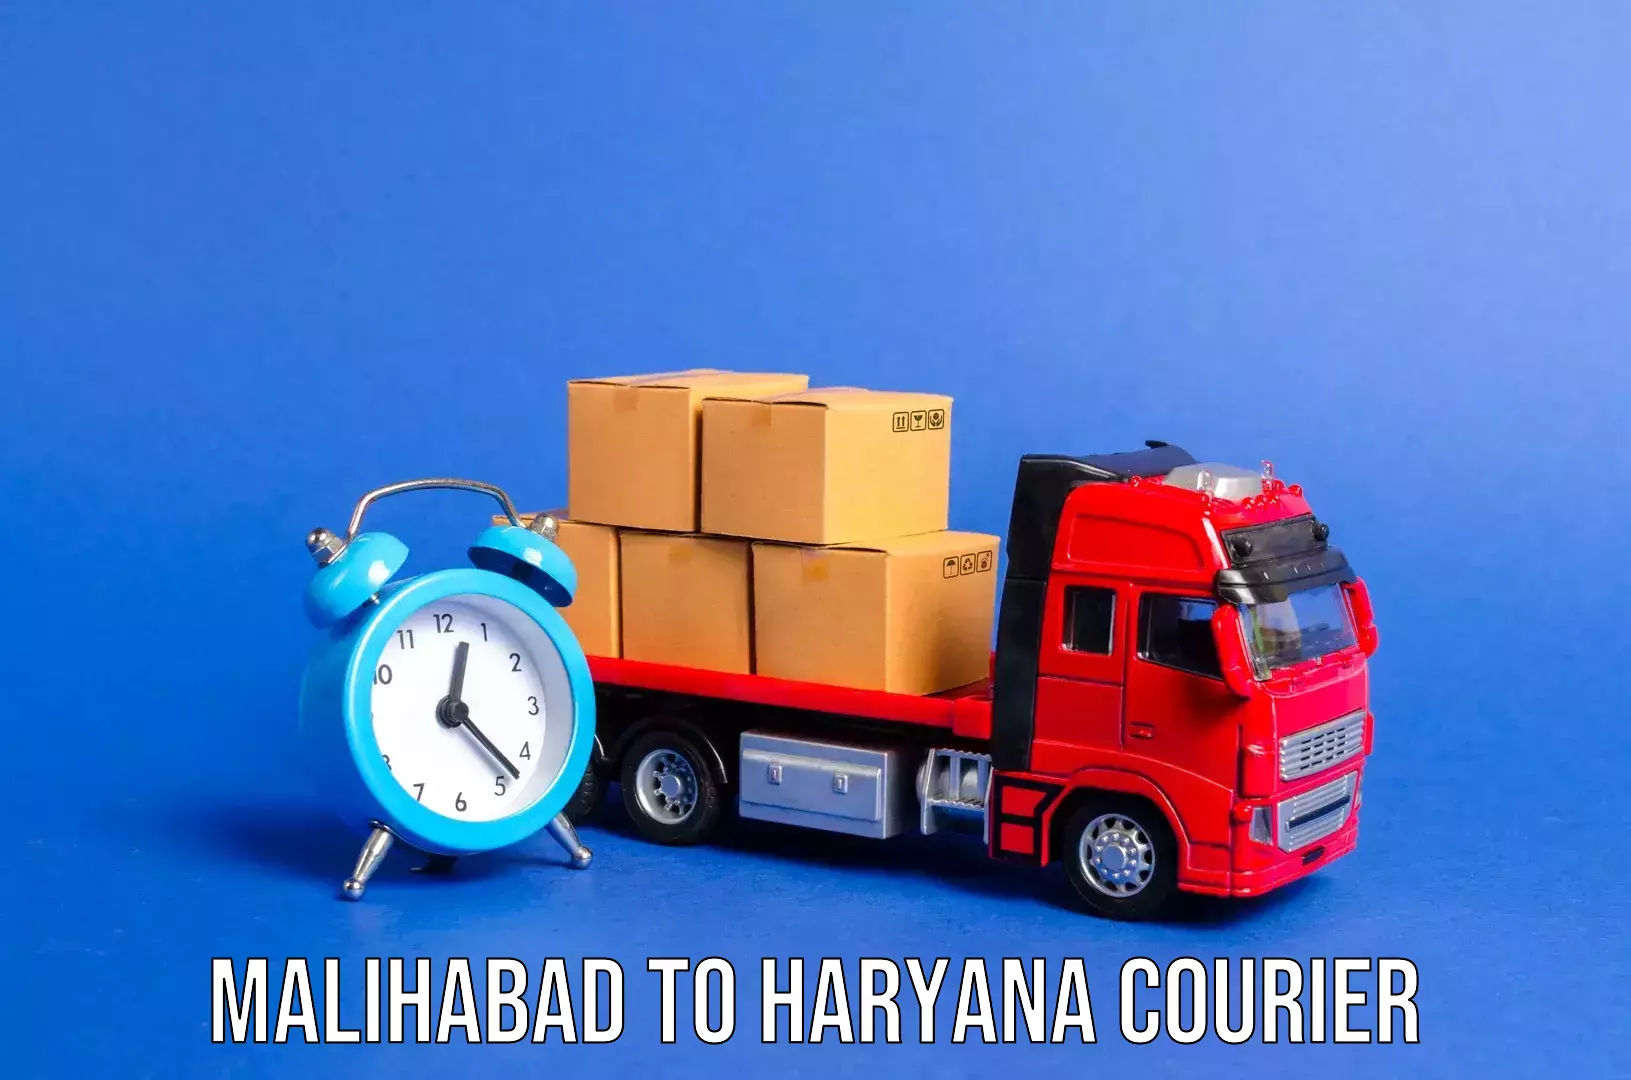 Luggage transport consulting Malihabad to Sonipat